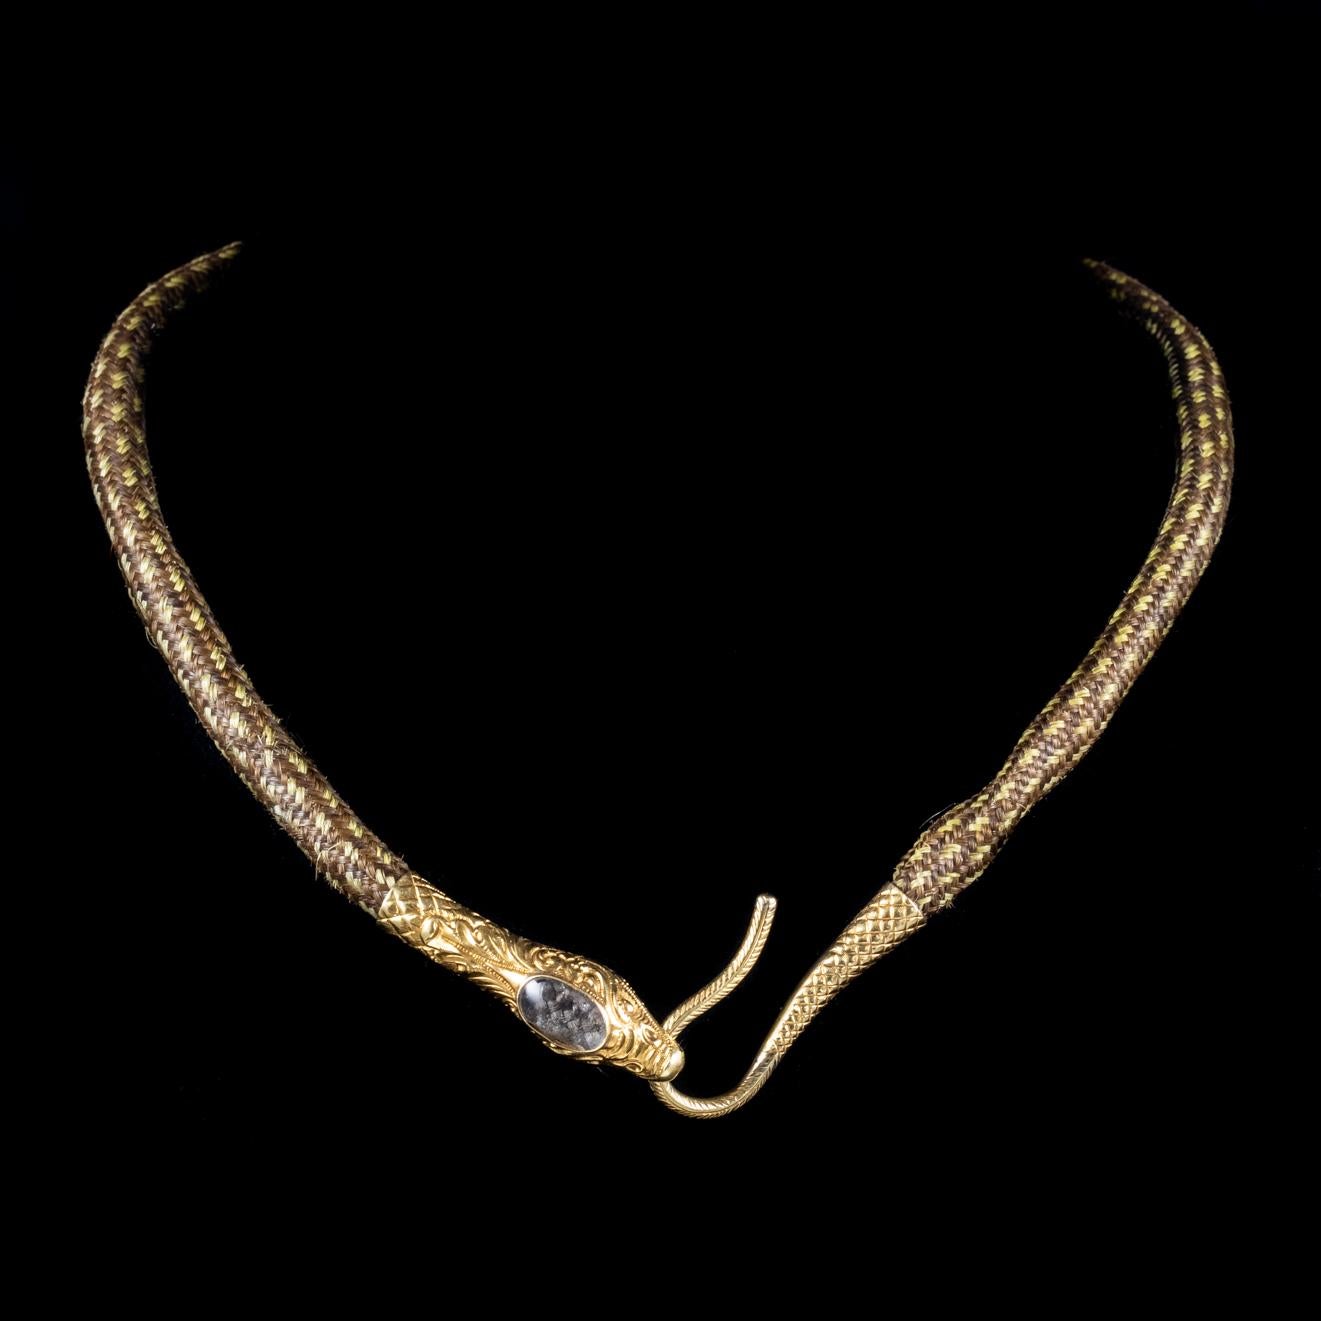 An exquisite antique Mourning snake necklace from the Georgian era made up of three different shades of lovely brown hair which is plaited beautifully to create one thick strand.

Mourning jewellery was sometimes created from strands of hair and was